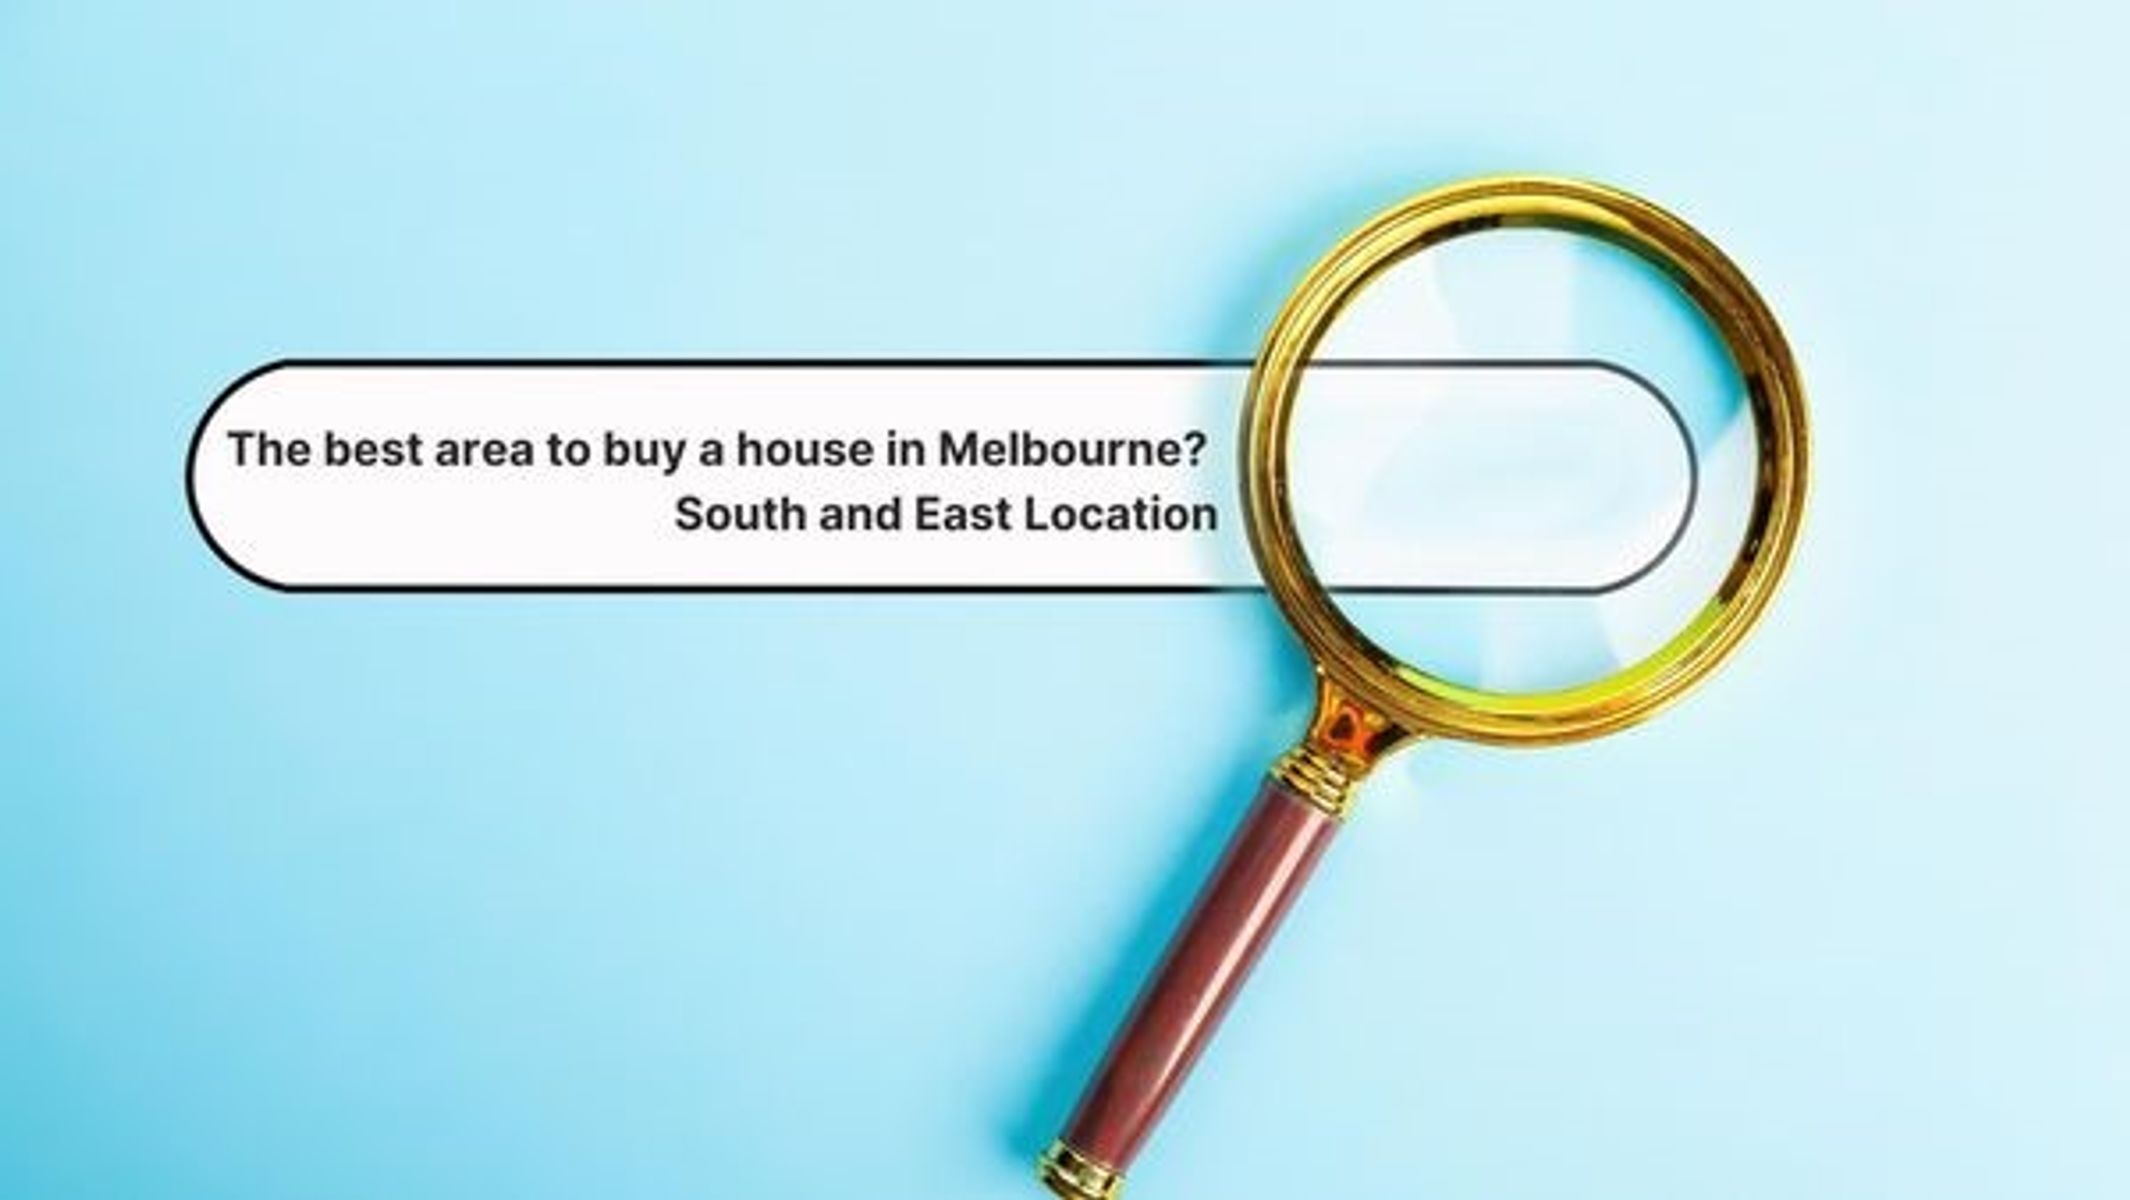 The best area to buy a house in Melbourne? South and East Location